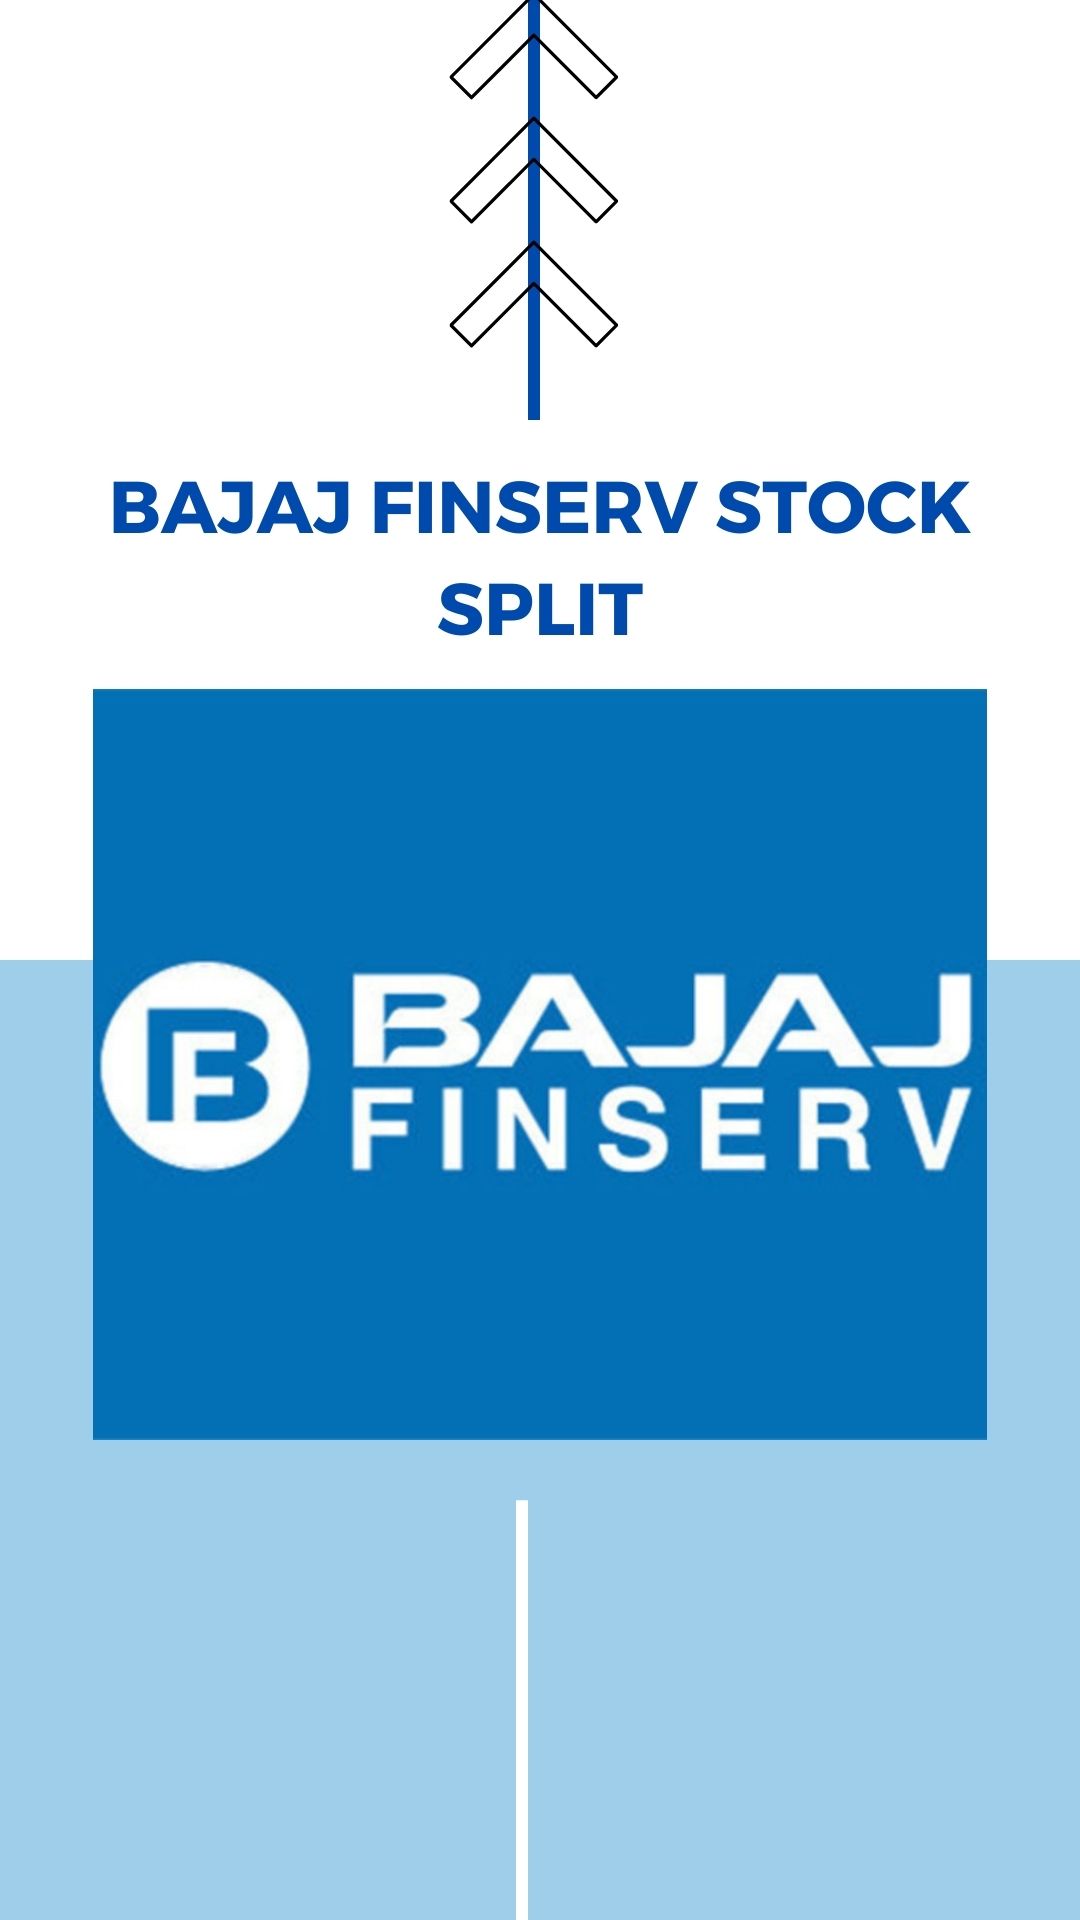 Bajaj Finserv Share Price Today, Live NSE/BSE, Financials & Stock Analysis